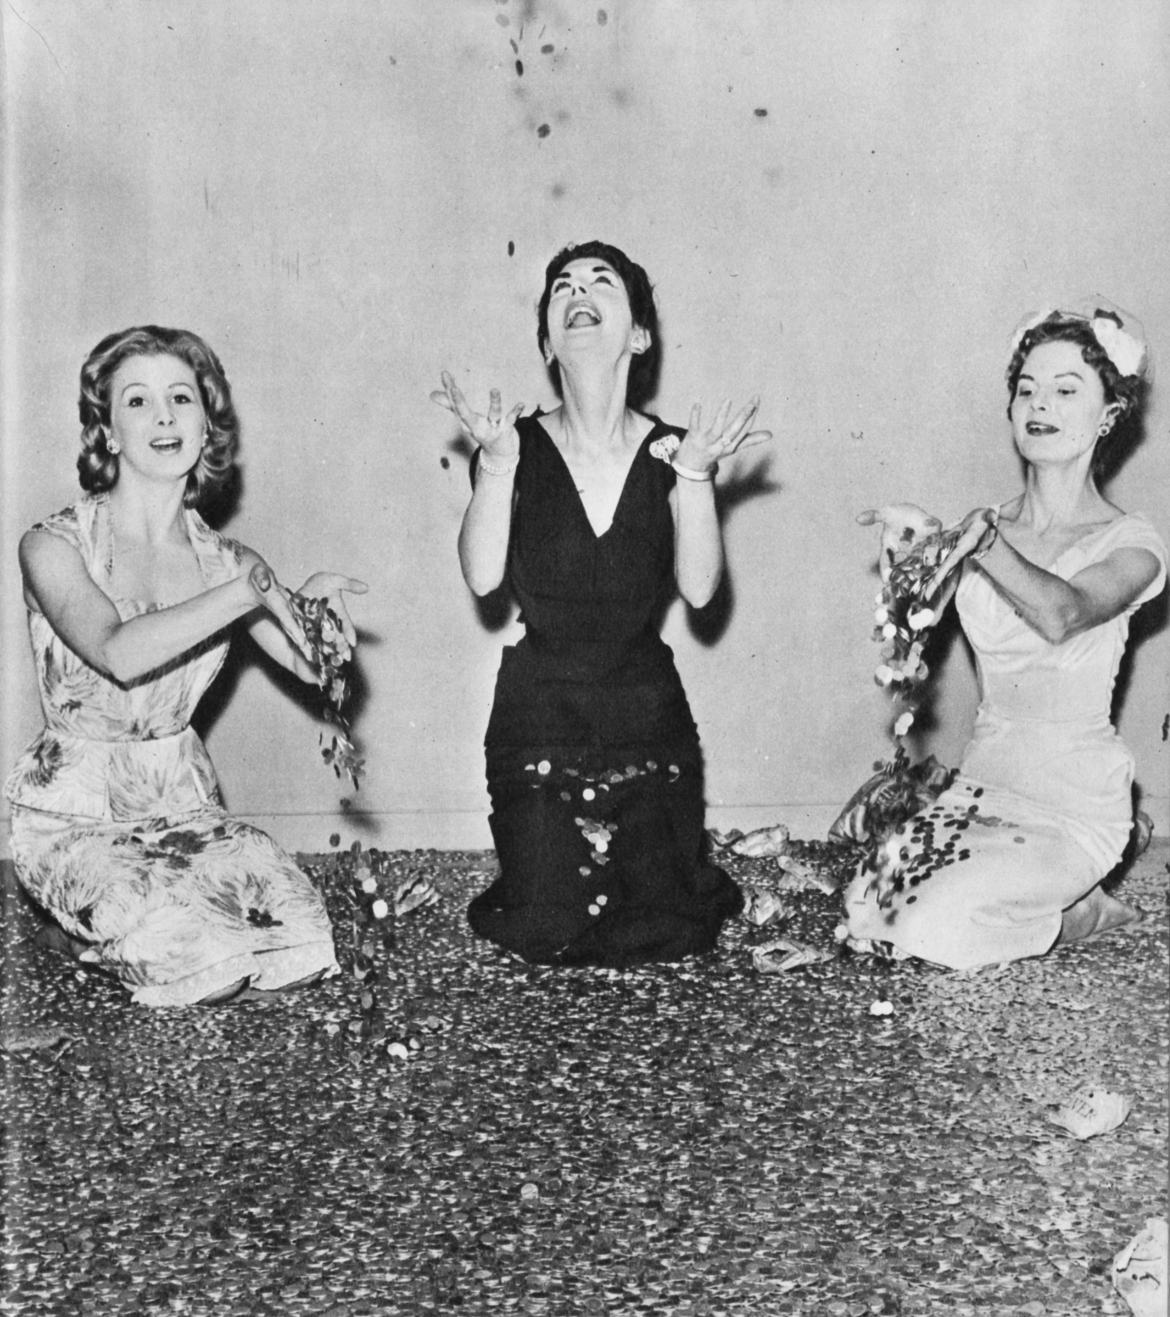 Three women throw shillings into the air